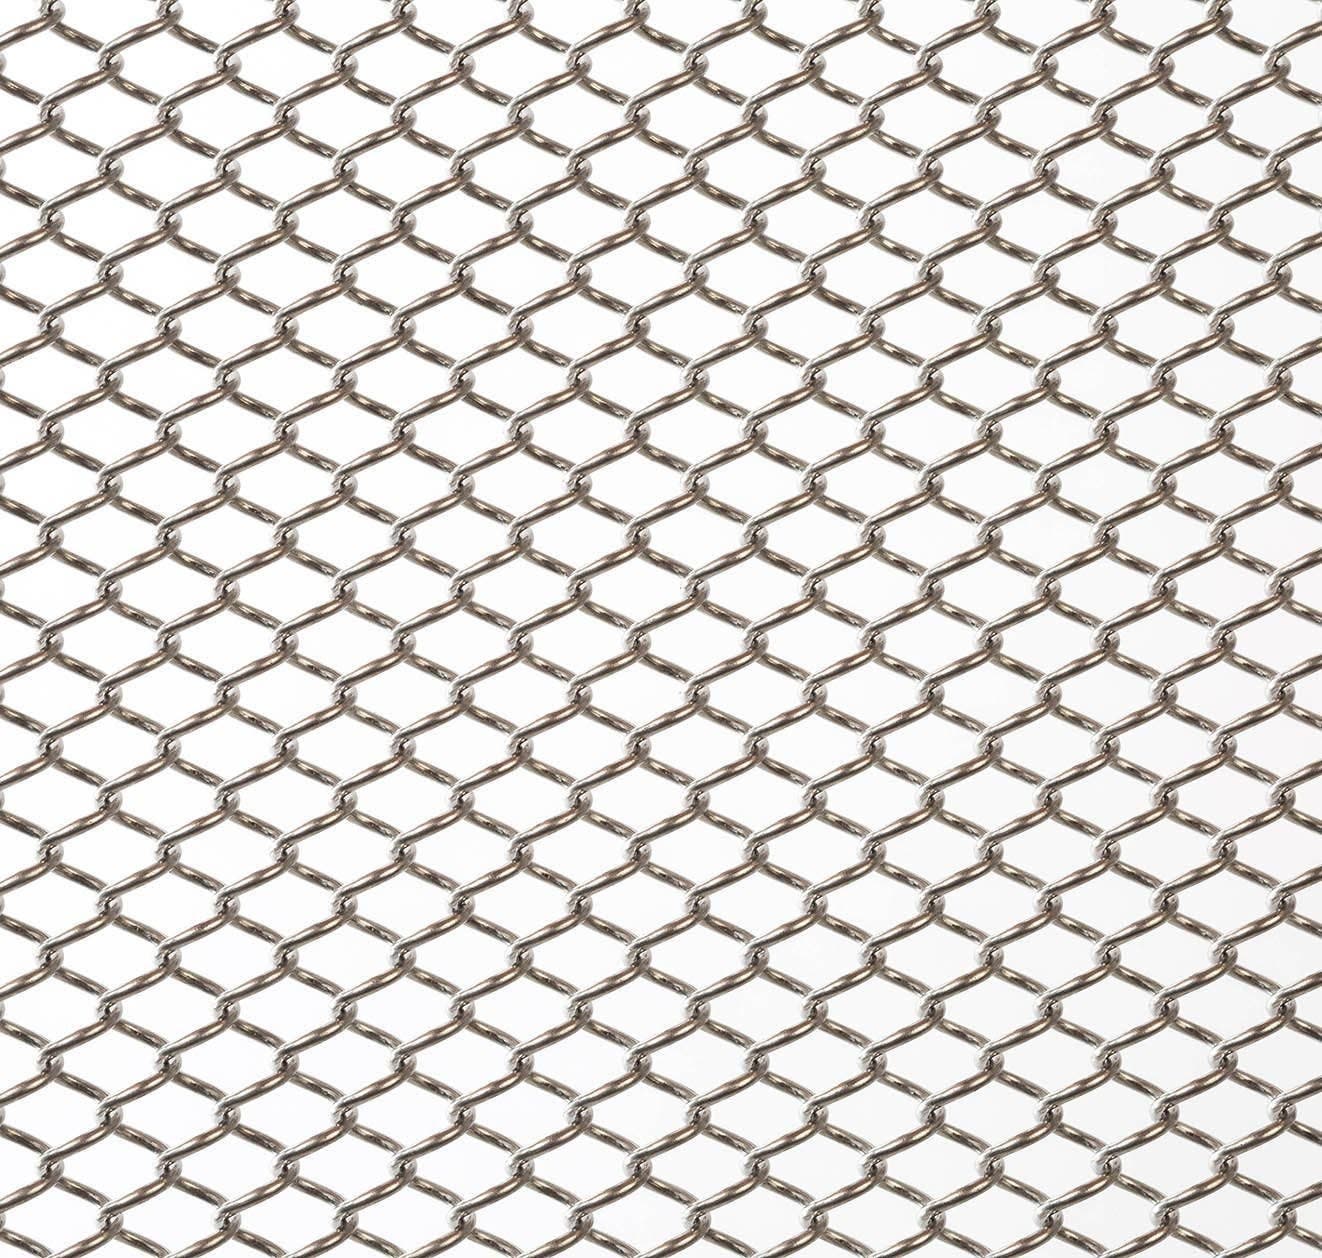 Rope Net Transparent Mesh Texture Background, Gear, Square, Transparent  Background Image And Wallpaper for Free Download